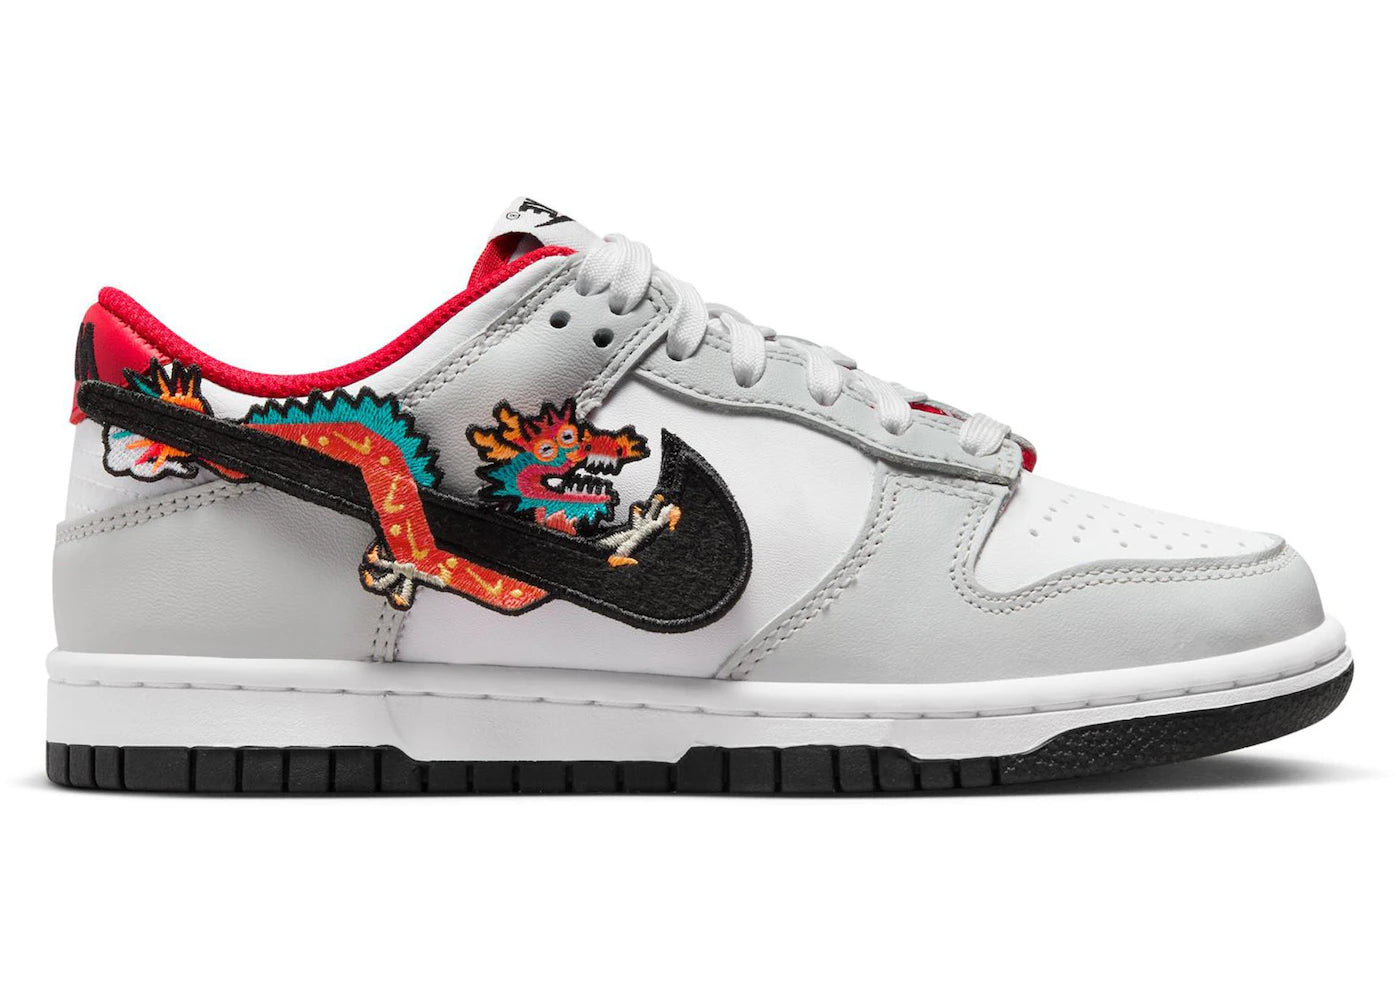 Nike Dunk Low Year Of The Dragon (GS)